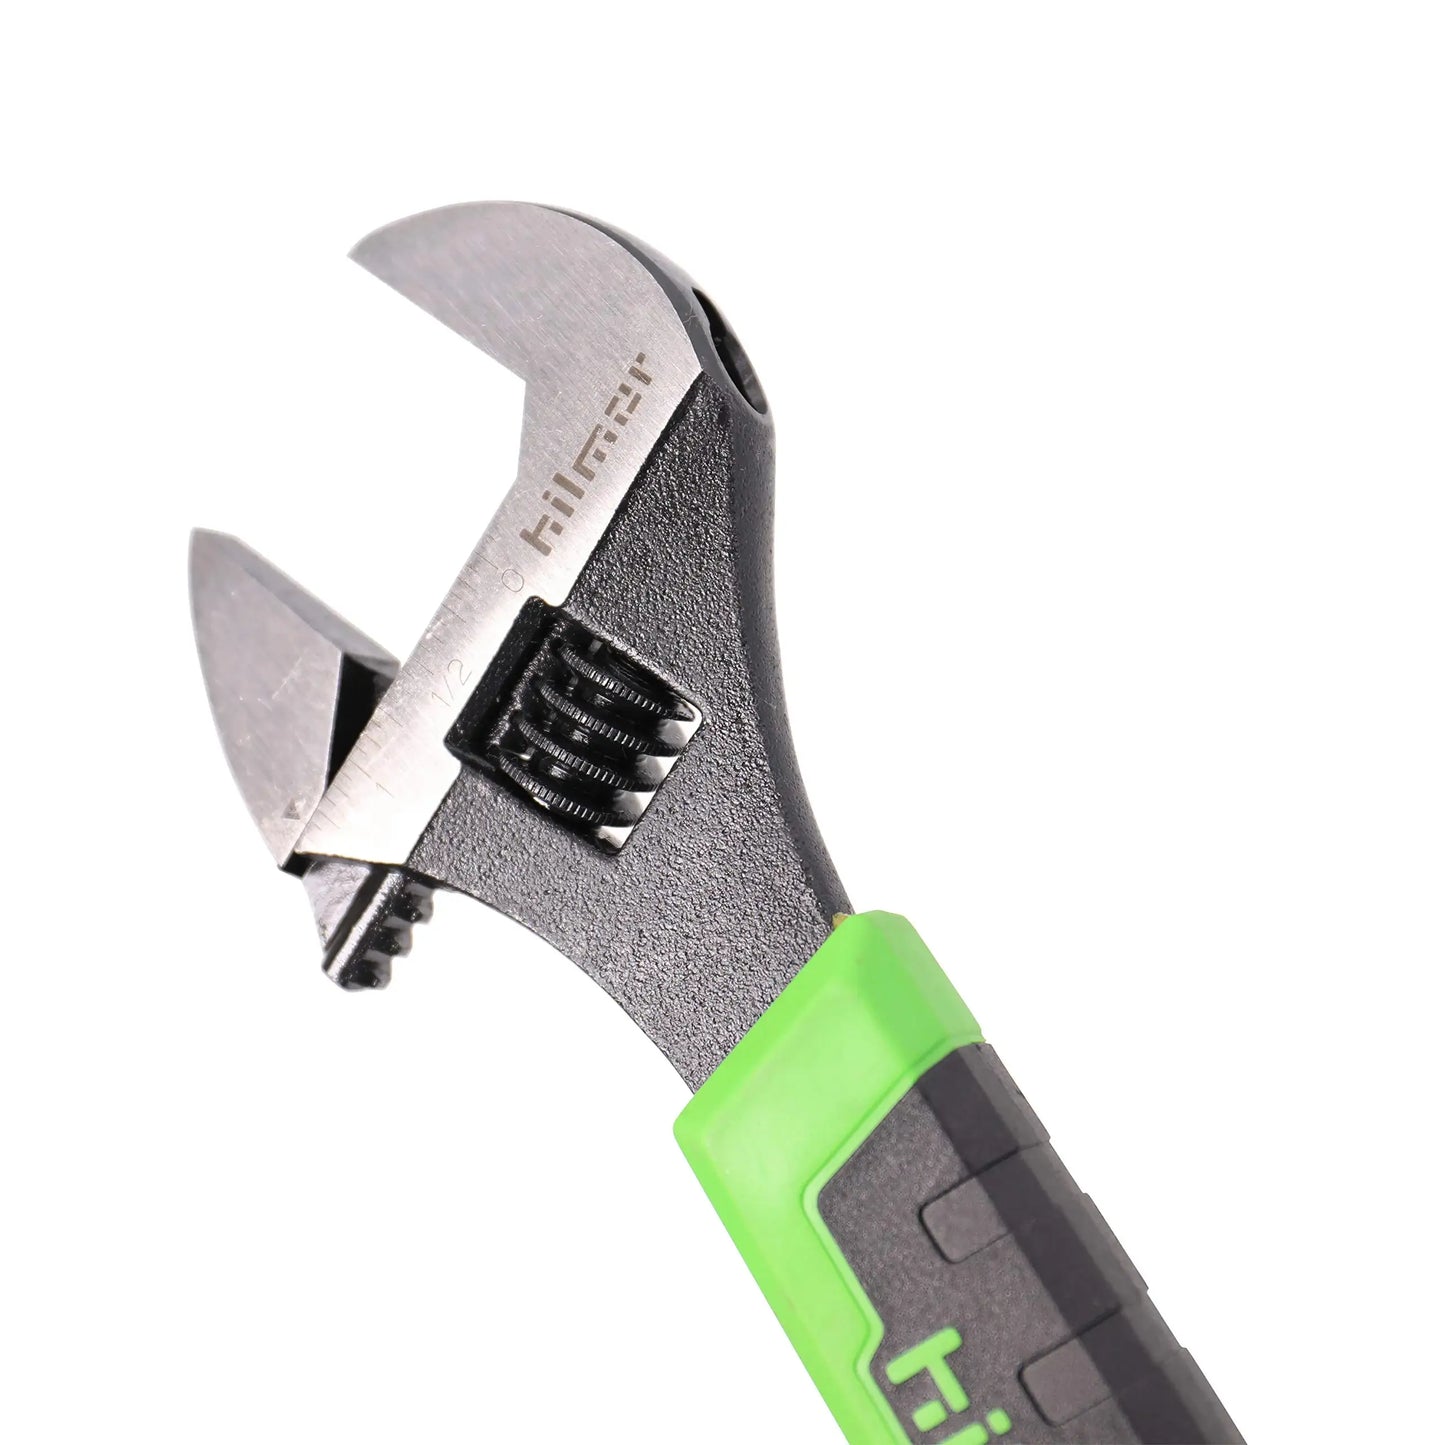 Hilmor 10 Adjustable Crescent Wrench with Rubber Handle Grip, Black & Green, AW10 1885421 Third